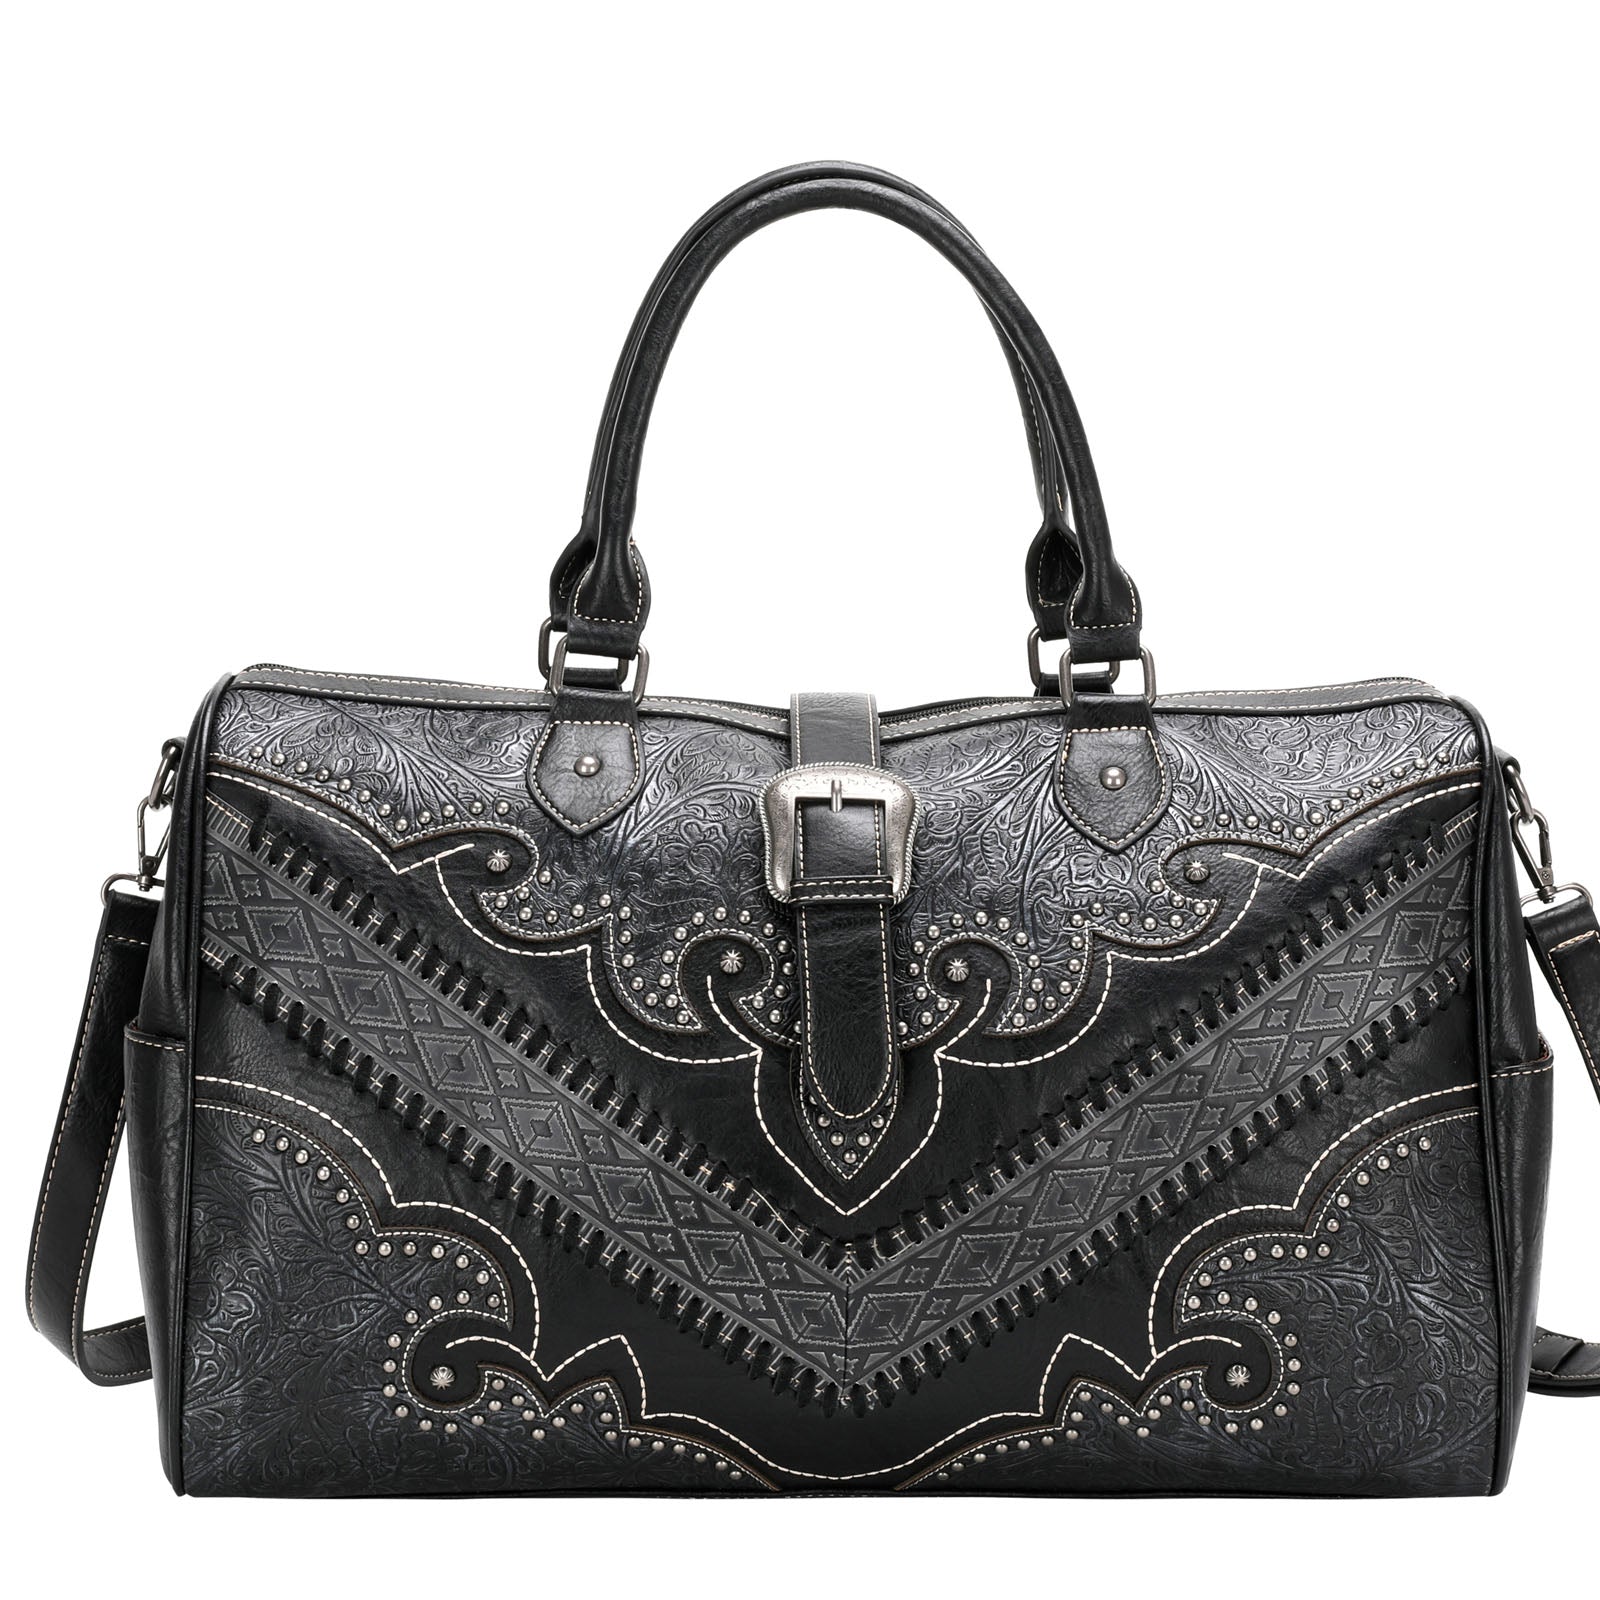 Montana West Buckle Collection Weekender Bag - Cowgirl Wear